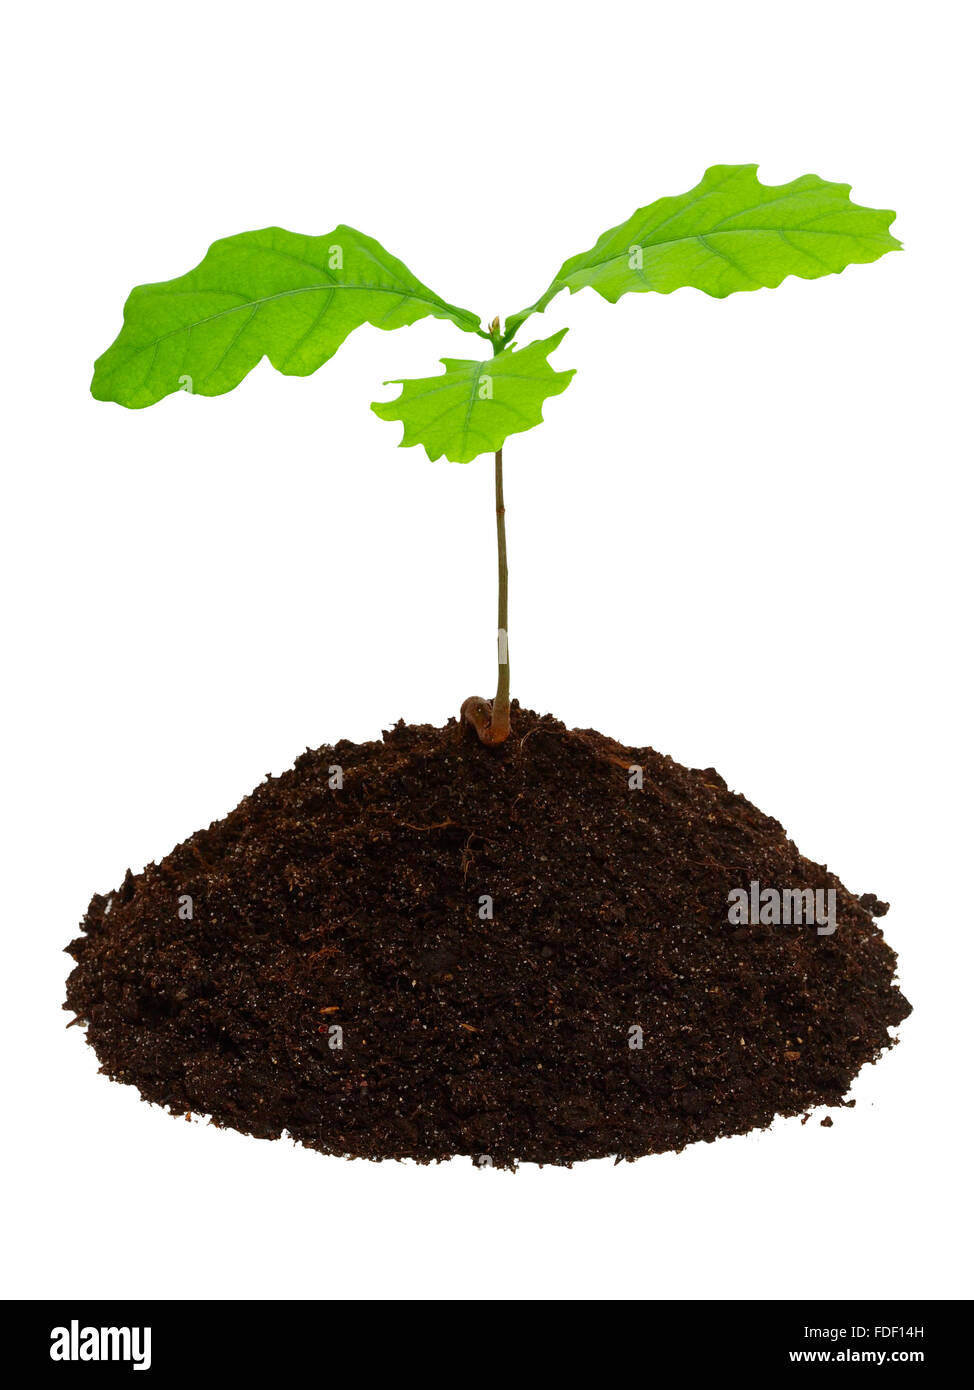 Sprout of oak with ground isolated on the white background. Stock Photo